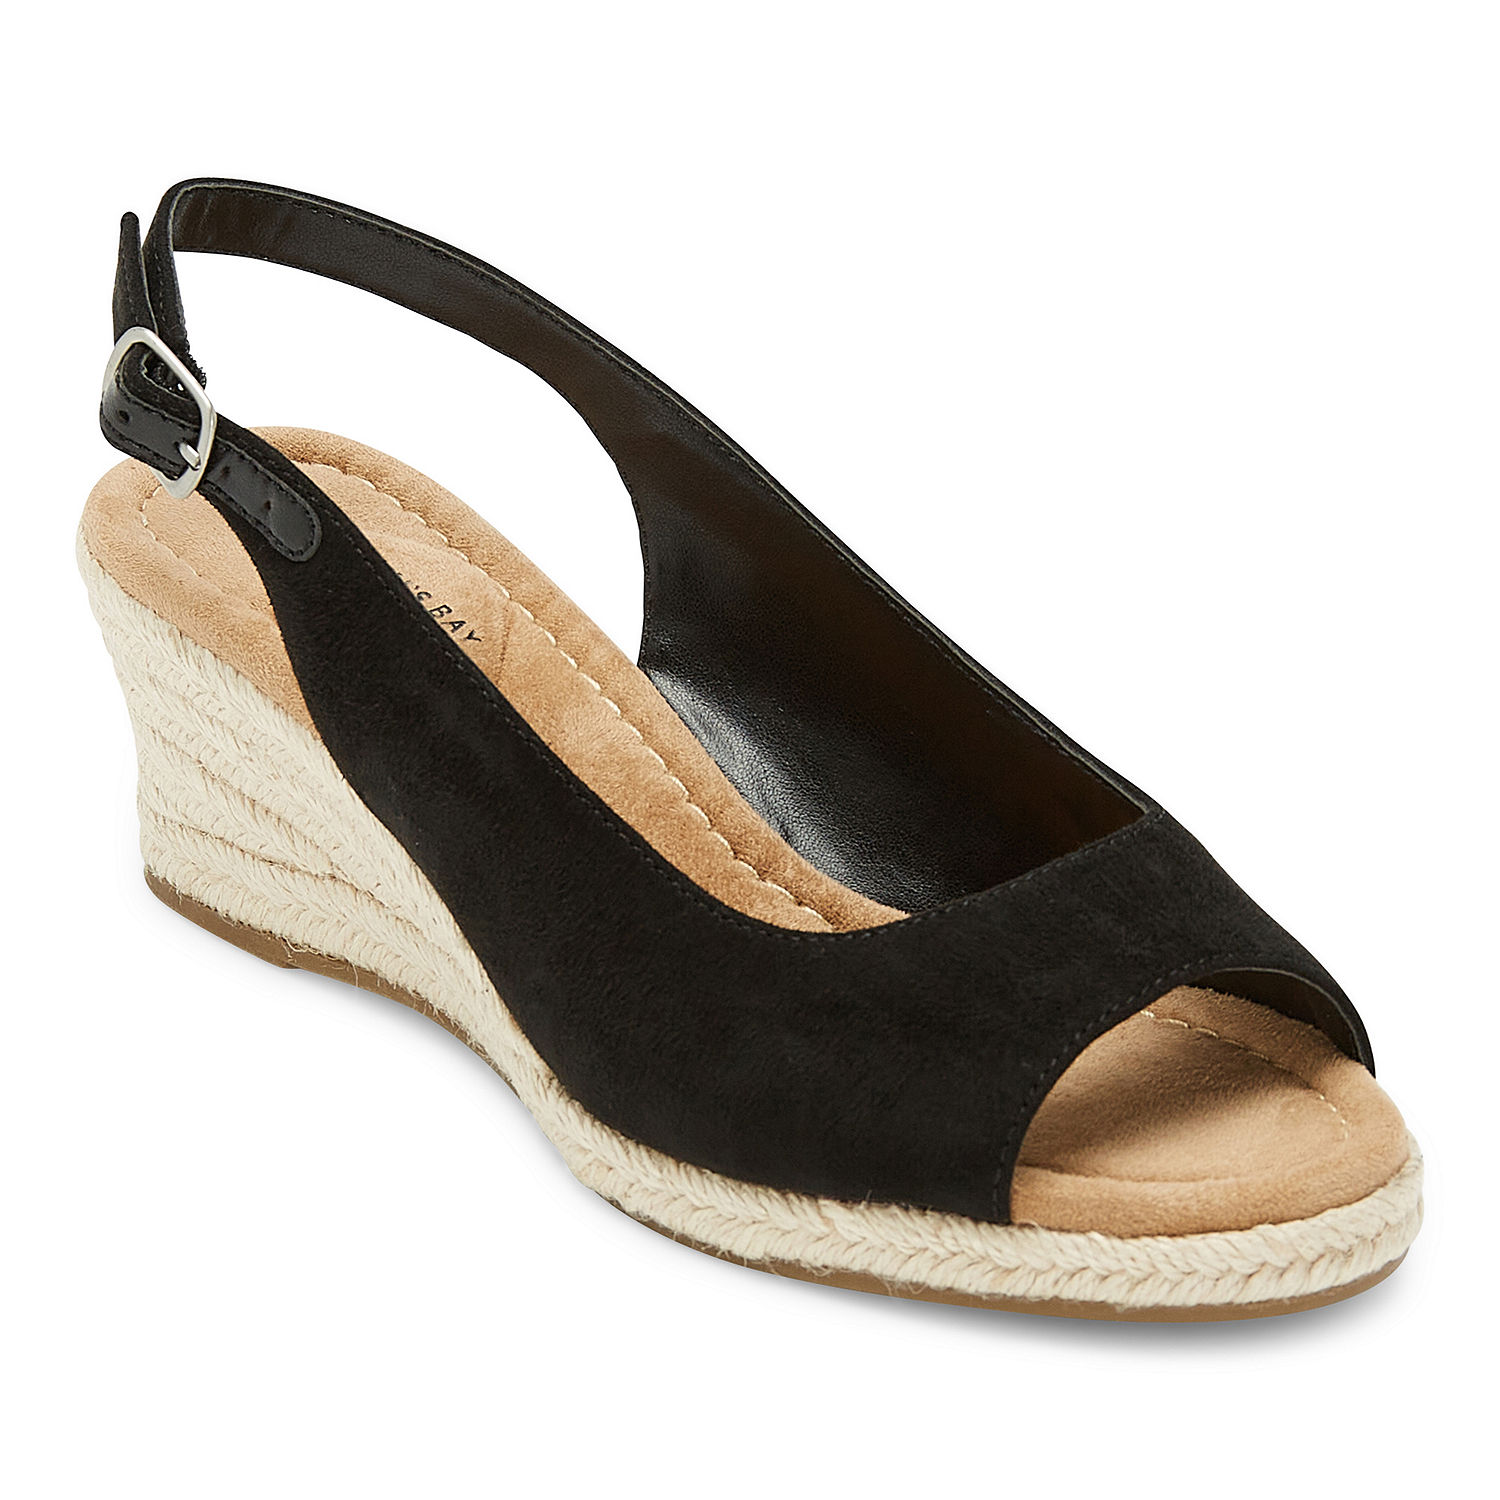 St. John's Bay Womens Lawson Wedge Sandals - JCPenney